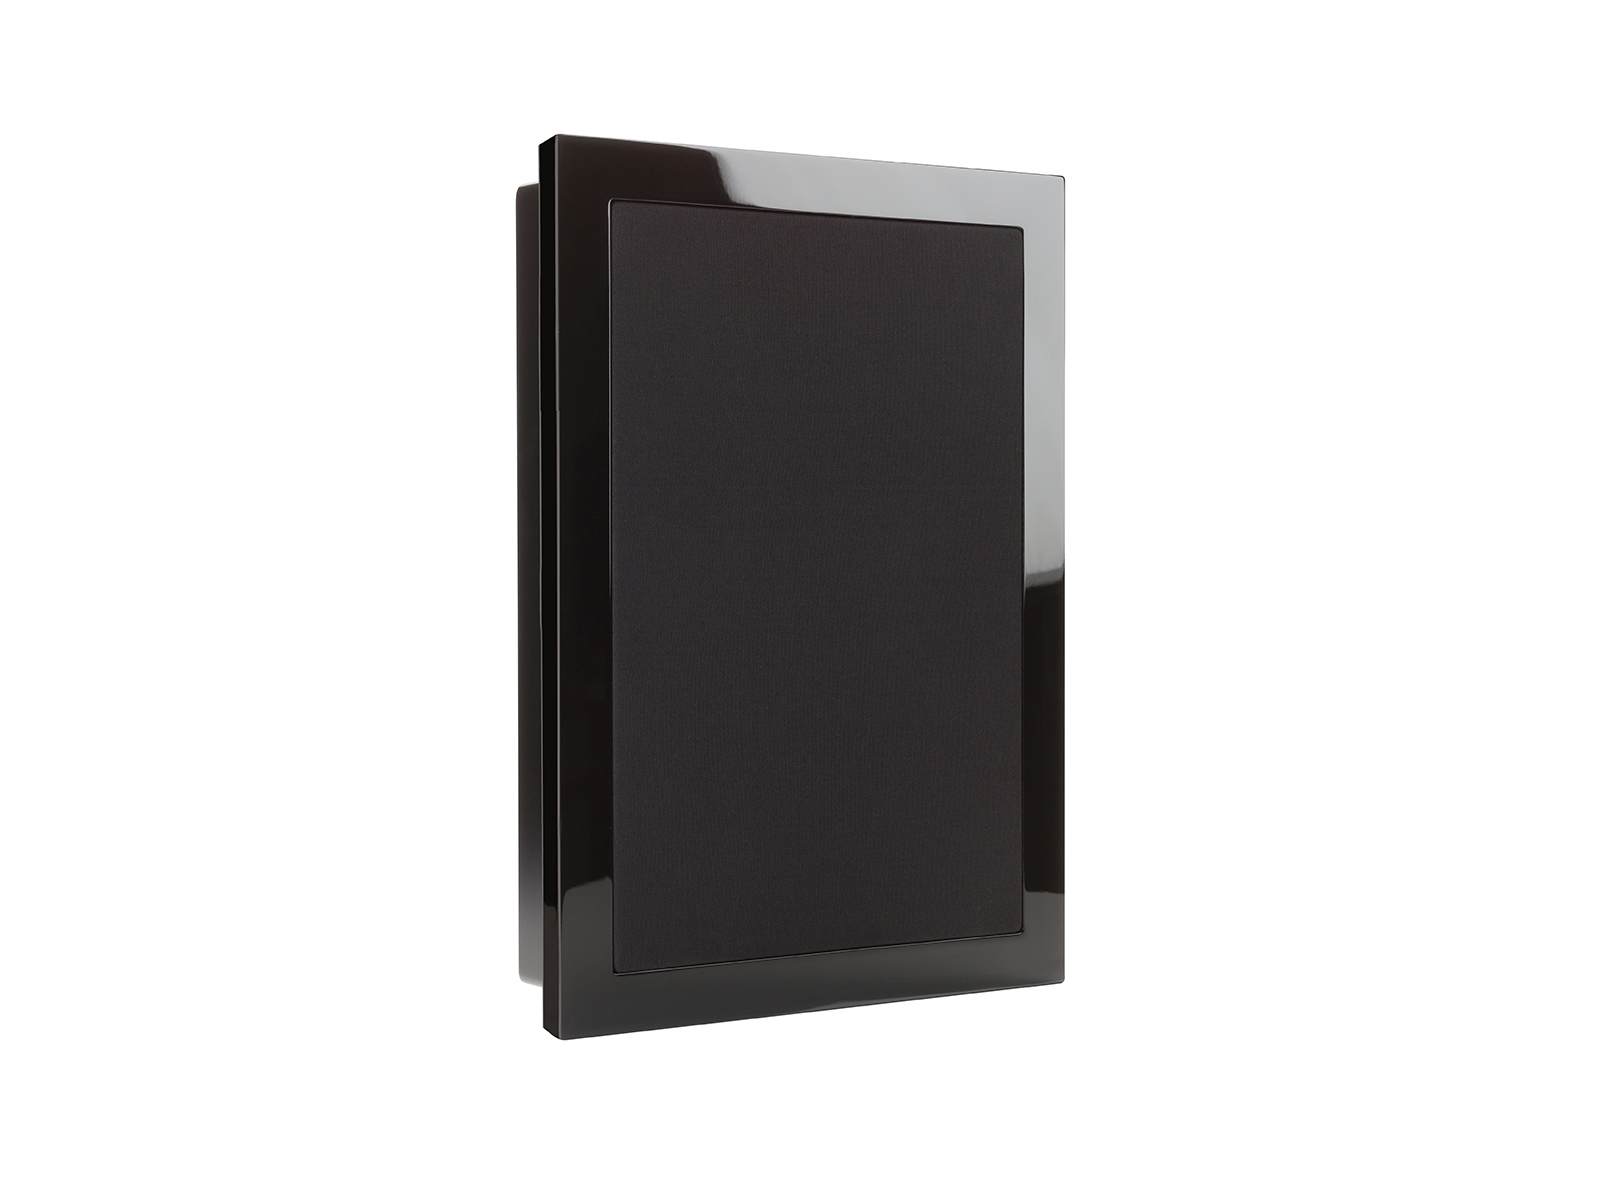 SoundFrame SF1, in-wall speakers, with a high gloss black lacquer finish.